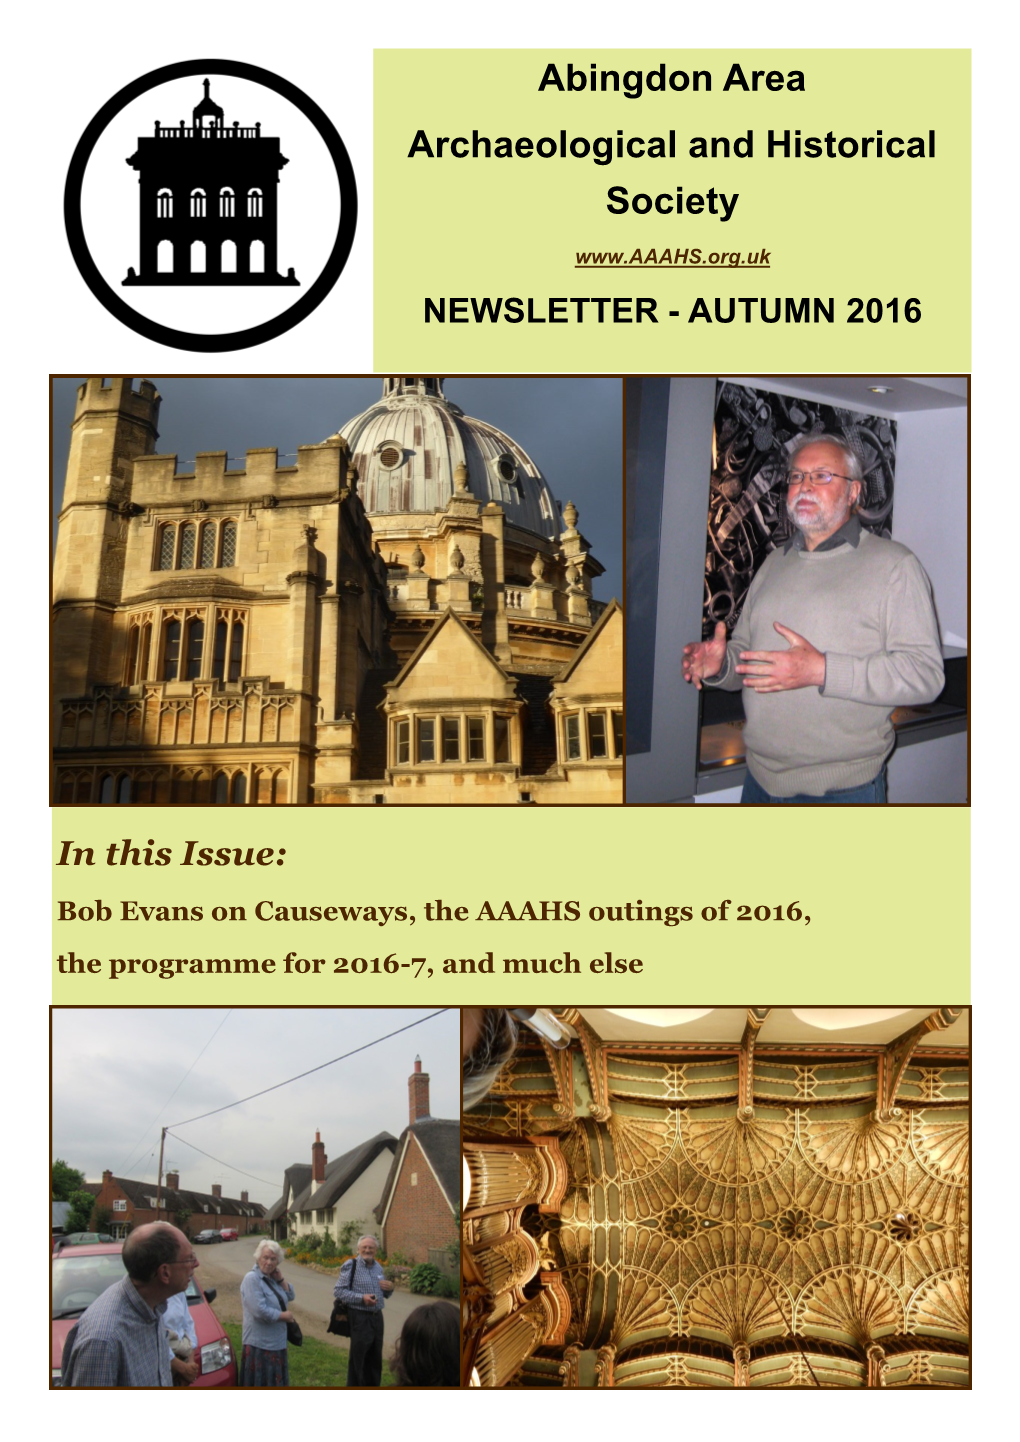 Causeways, the AAAHS Outings of 2016, the Programme for 2016-7, and Much Else AAAHS Newsletter—Autumn 2016